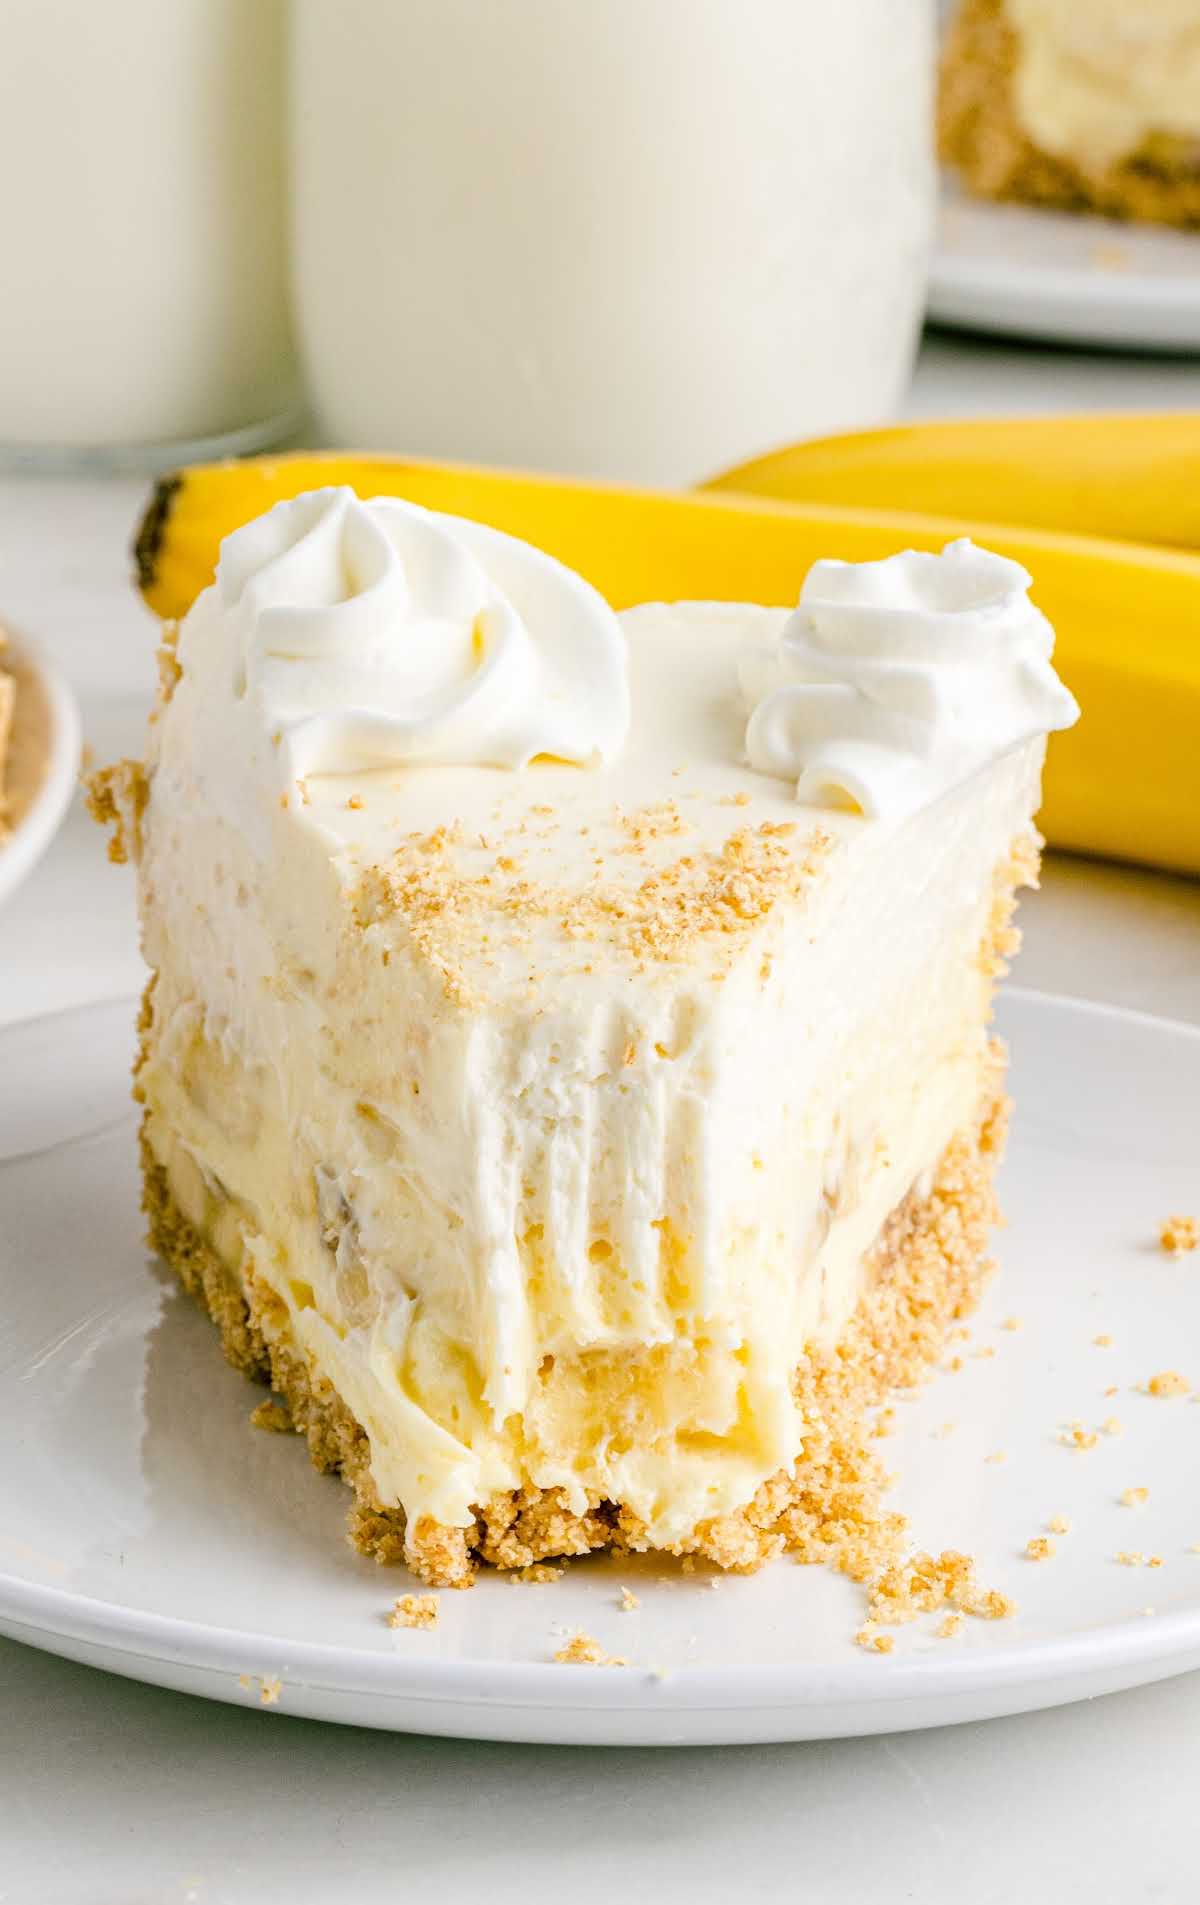 a close up shot of a slice of Banana Cream Cheesecake on a plate with a bite taken out of it